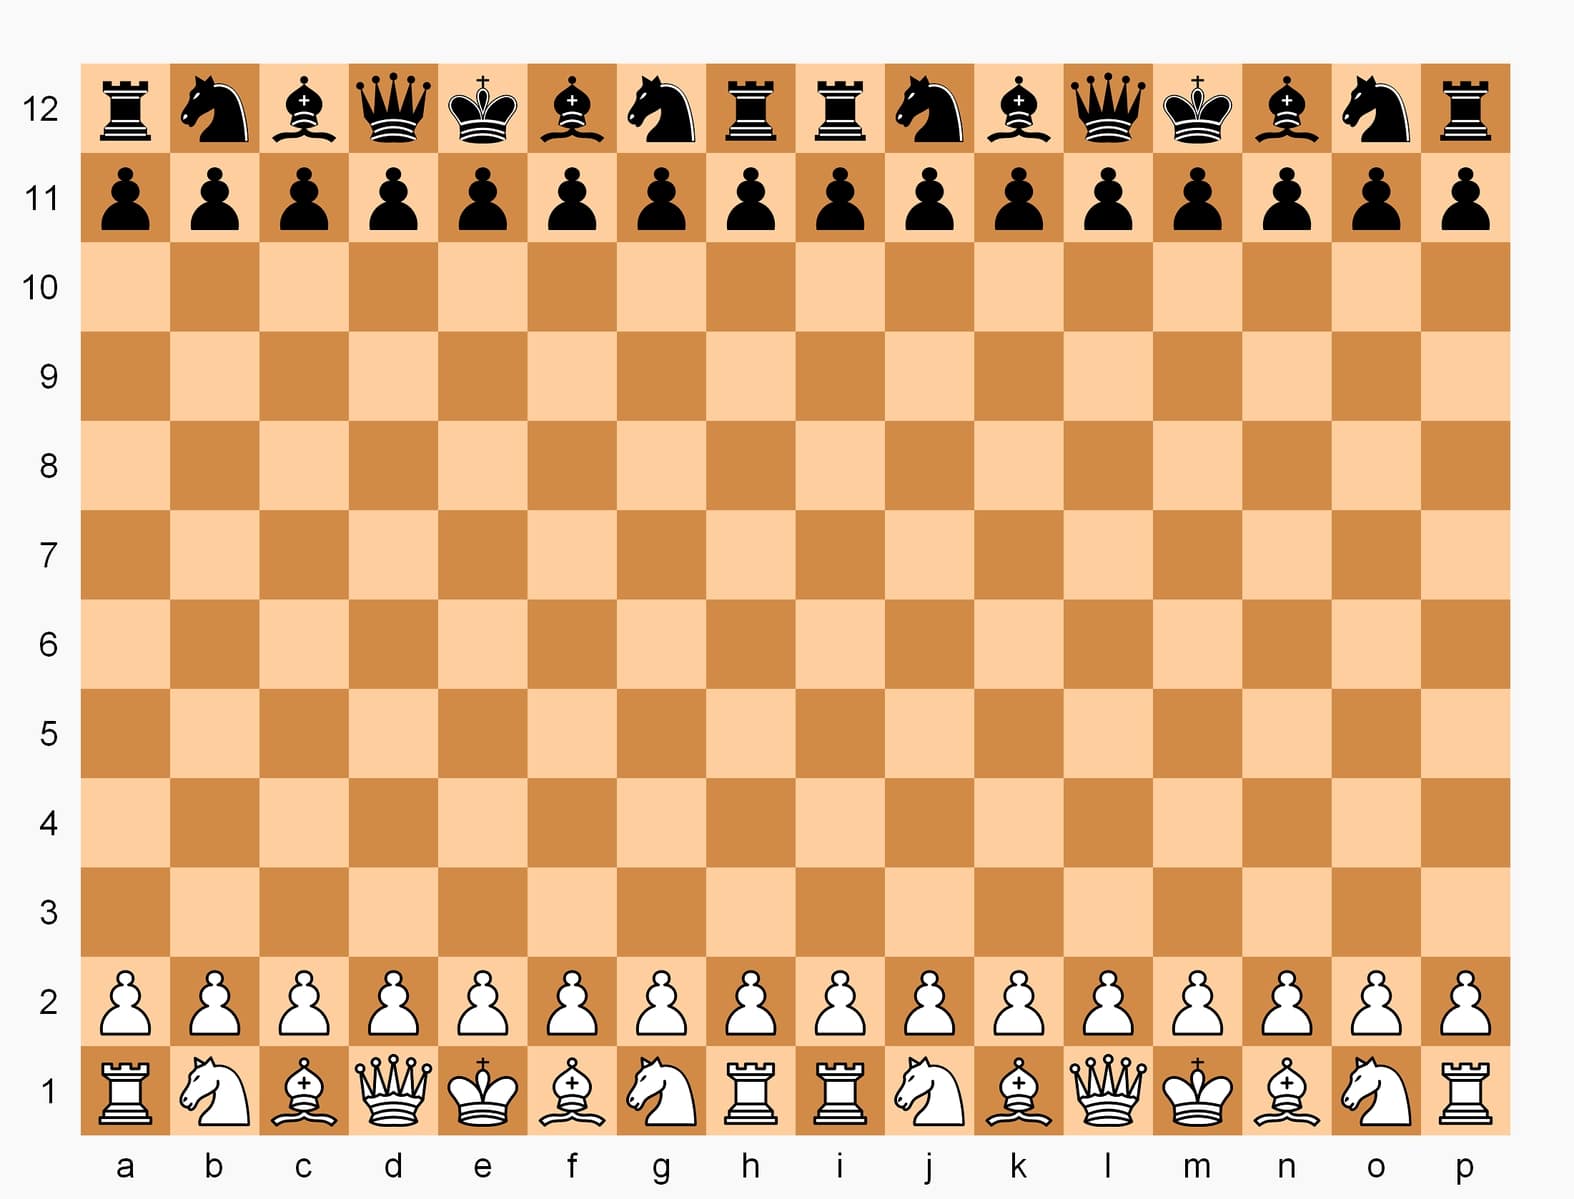 A double-sized chess baord